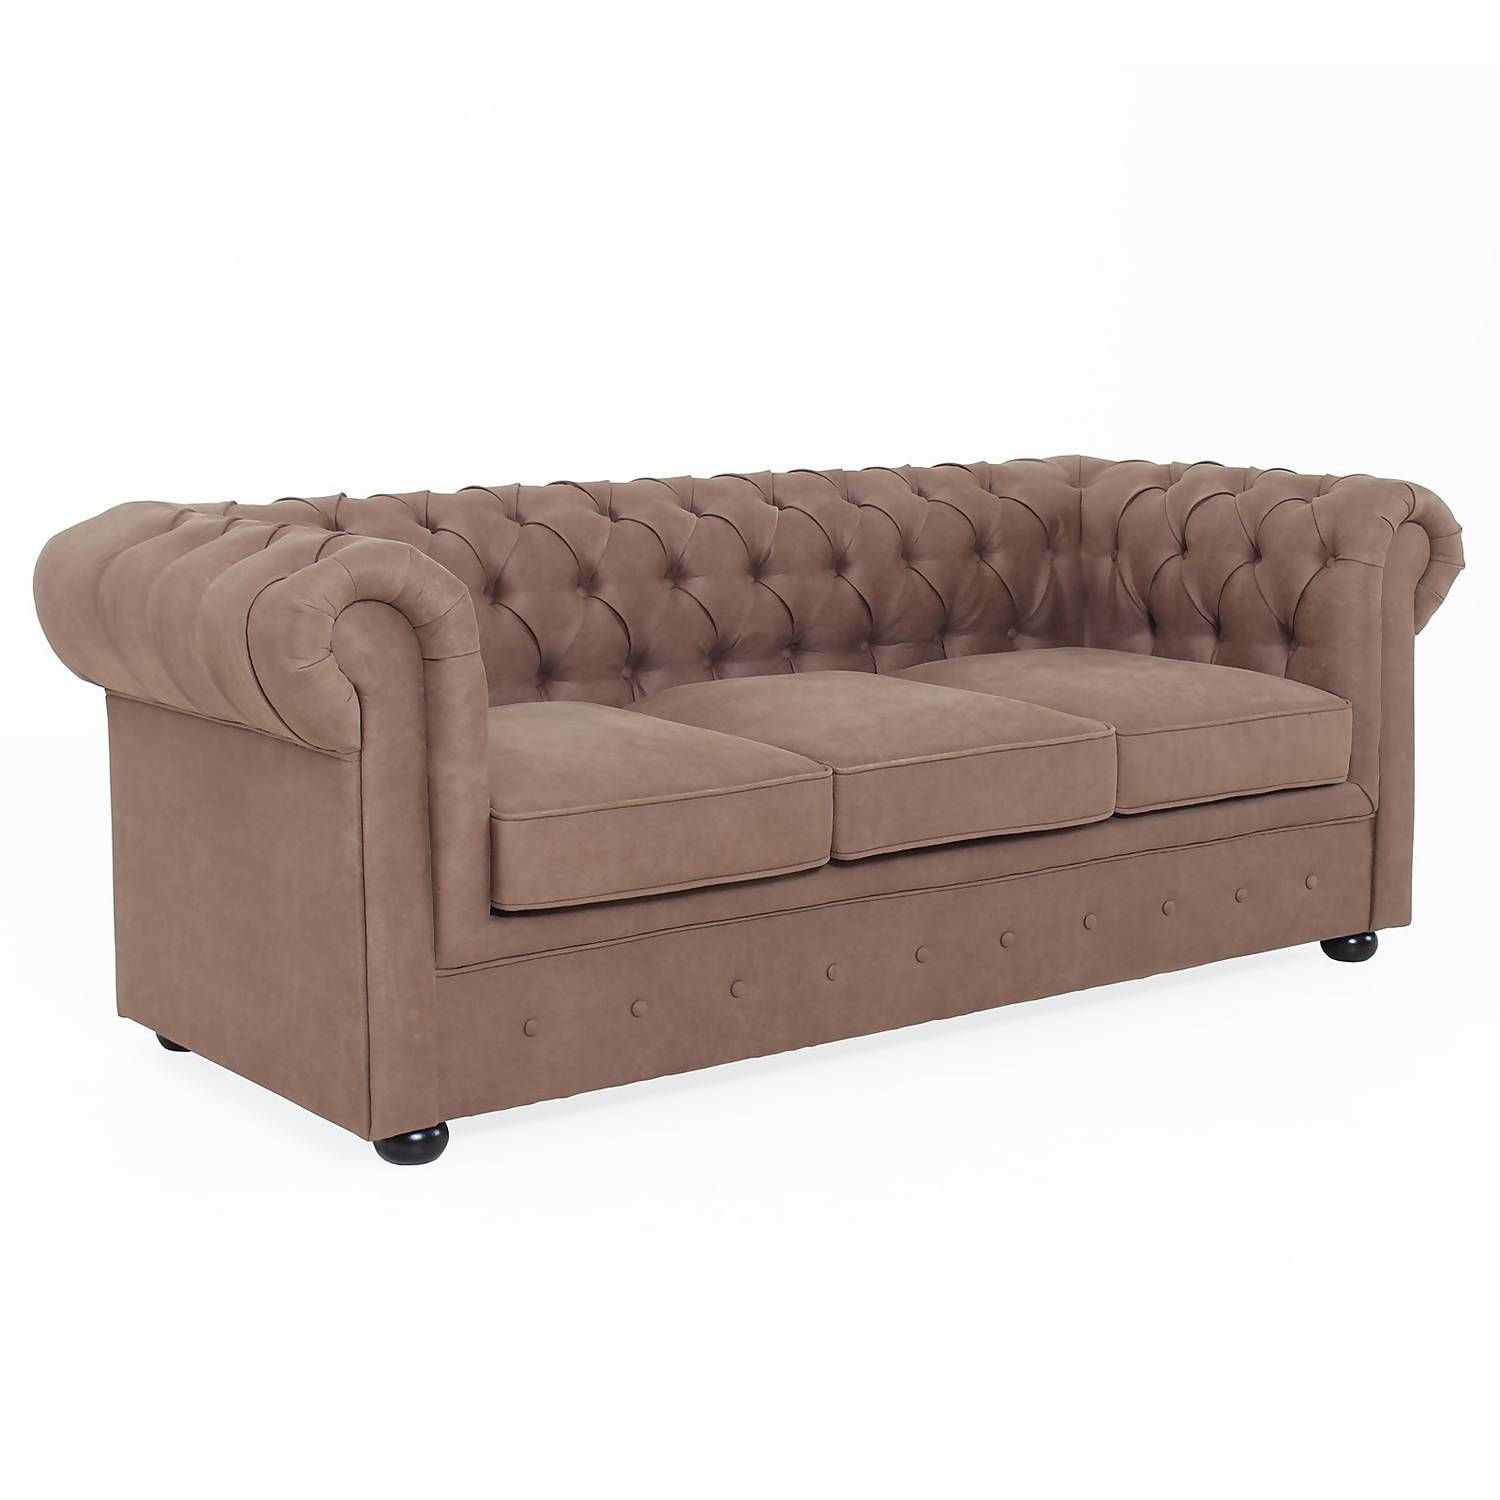 Chesterfield Faux Leather 3 Seater Sofa – Tan | Homebase Inside Traditional 3 Seater Faux Leather Sofas (View 15 of 15)